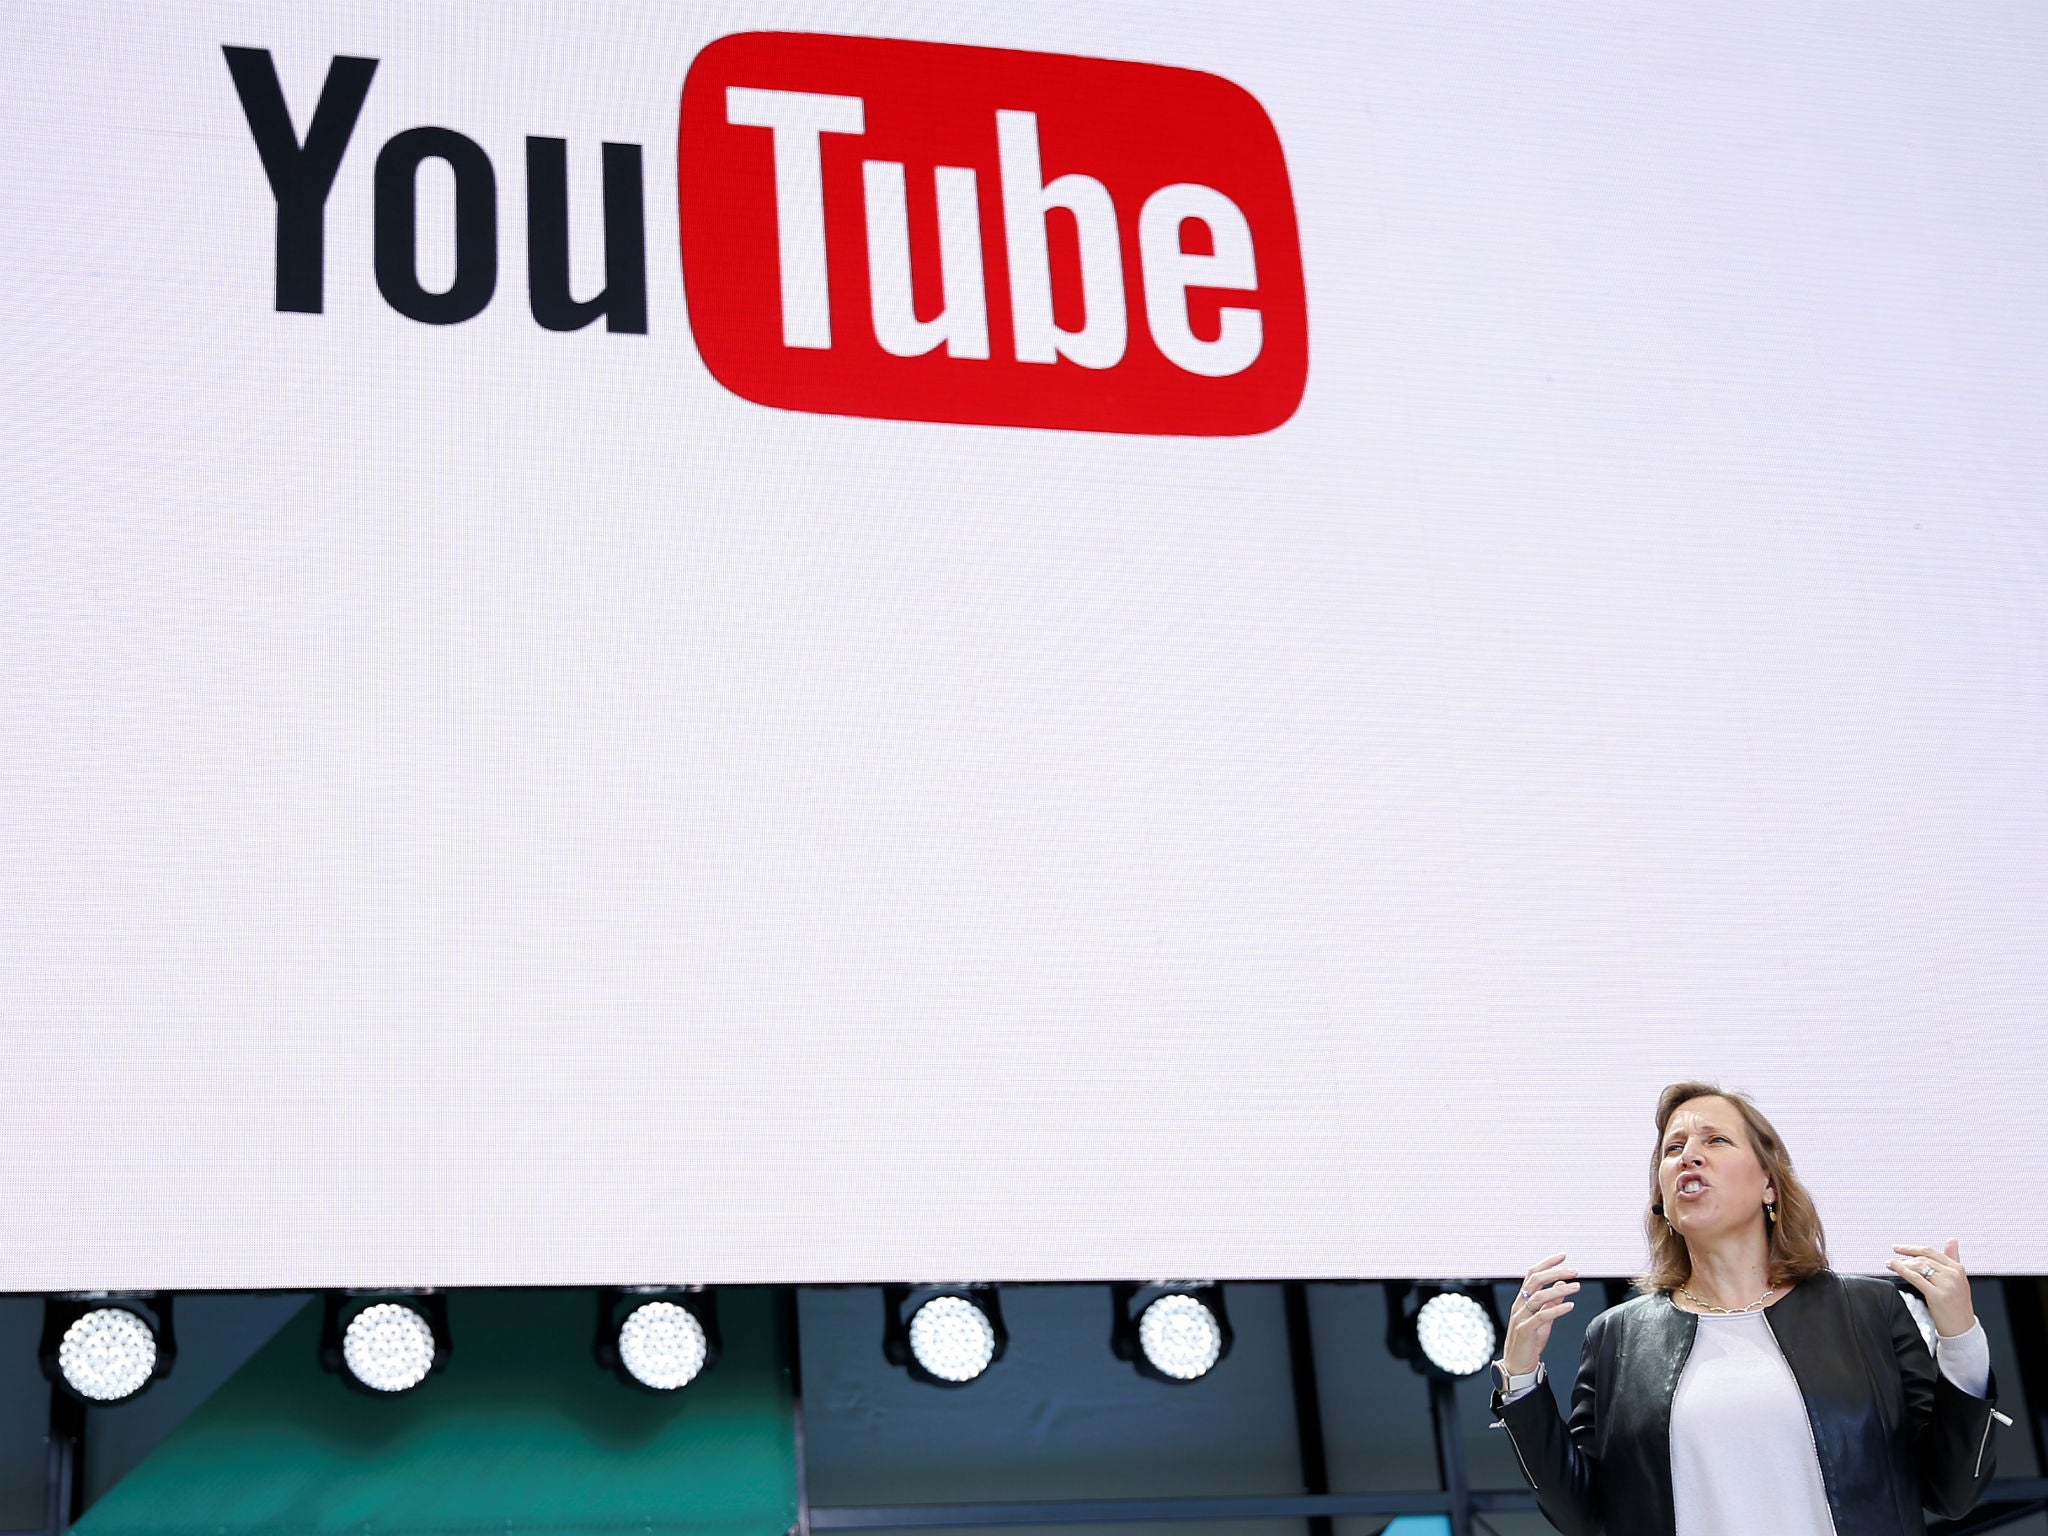 YouTube CEO Susan Wojcicki speaks on stage during a conference in San Jose, California